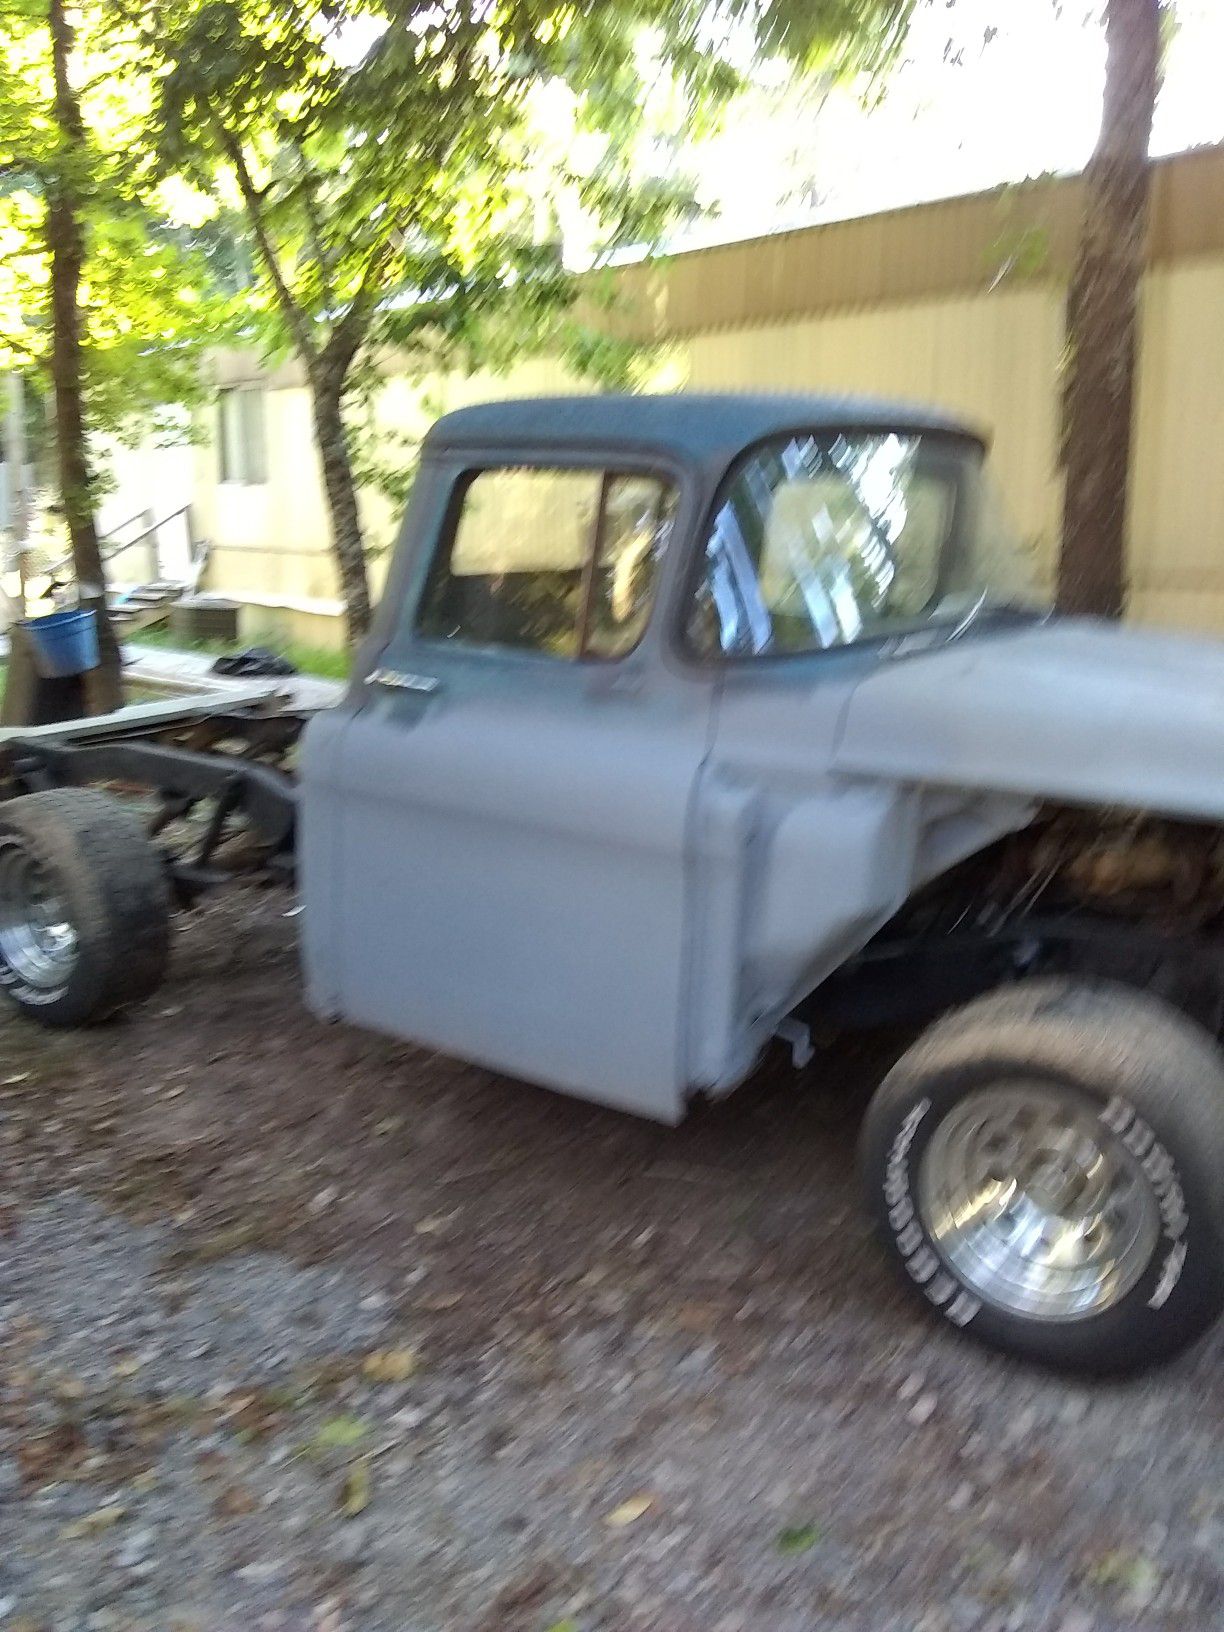 Truck. Not for sale. I. Have. The motor for sale. 235 ,6. Cylinder for. 350. Cash.